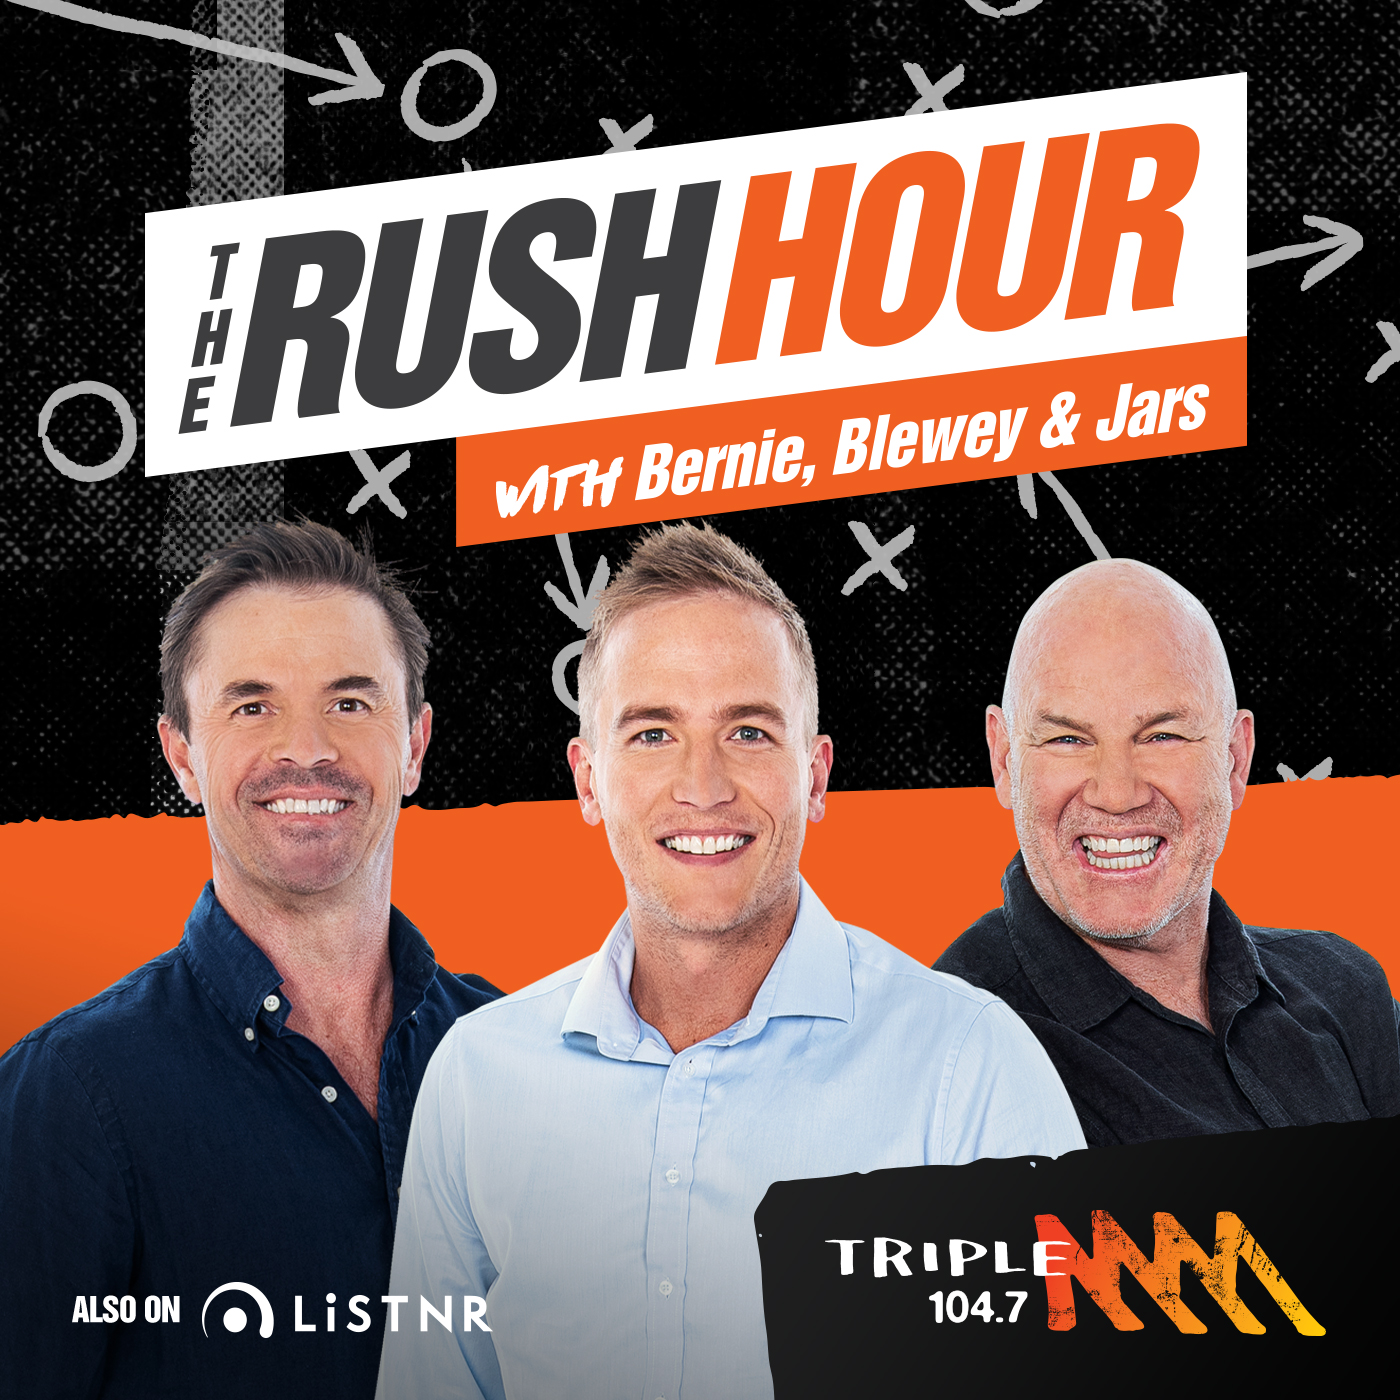 FULL SHOW - Connor Rozee live from Alberton Oval, Chelsea Randall and Mariana Rajic on joining The Amazing Race & Jars responds to Ditts going to Cheeky Greek! - The Rush Hour with Bernie, Blewey & Jars.